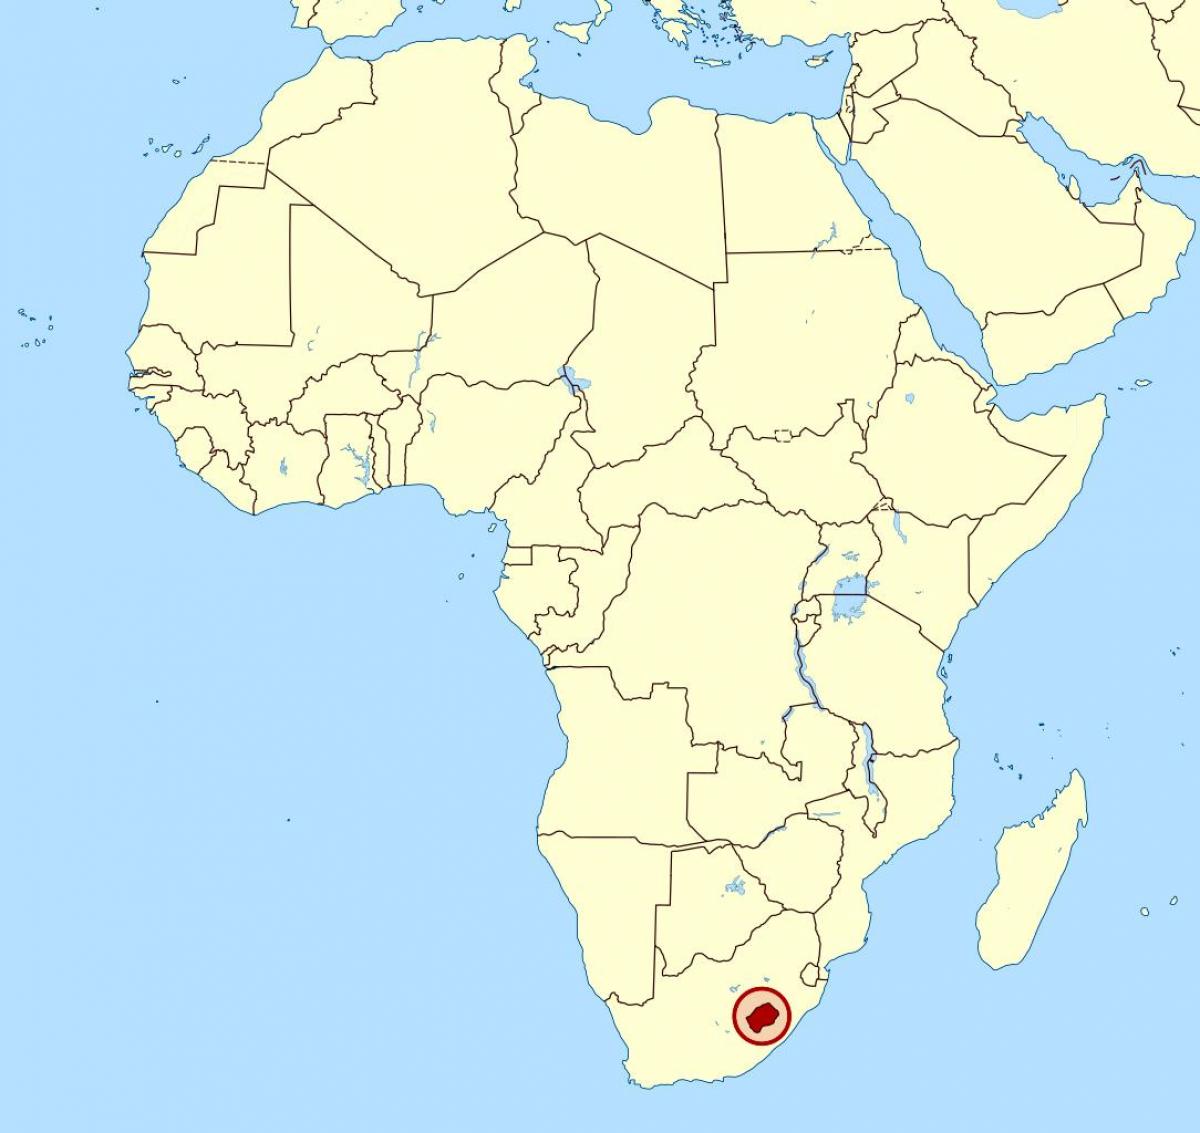 map of Lesotho on world